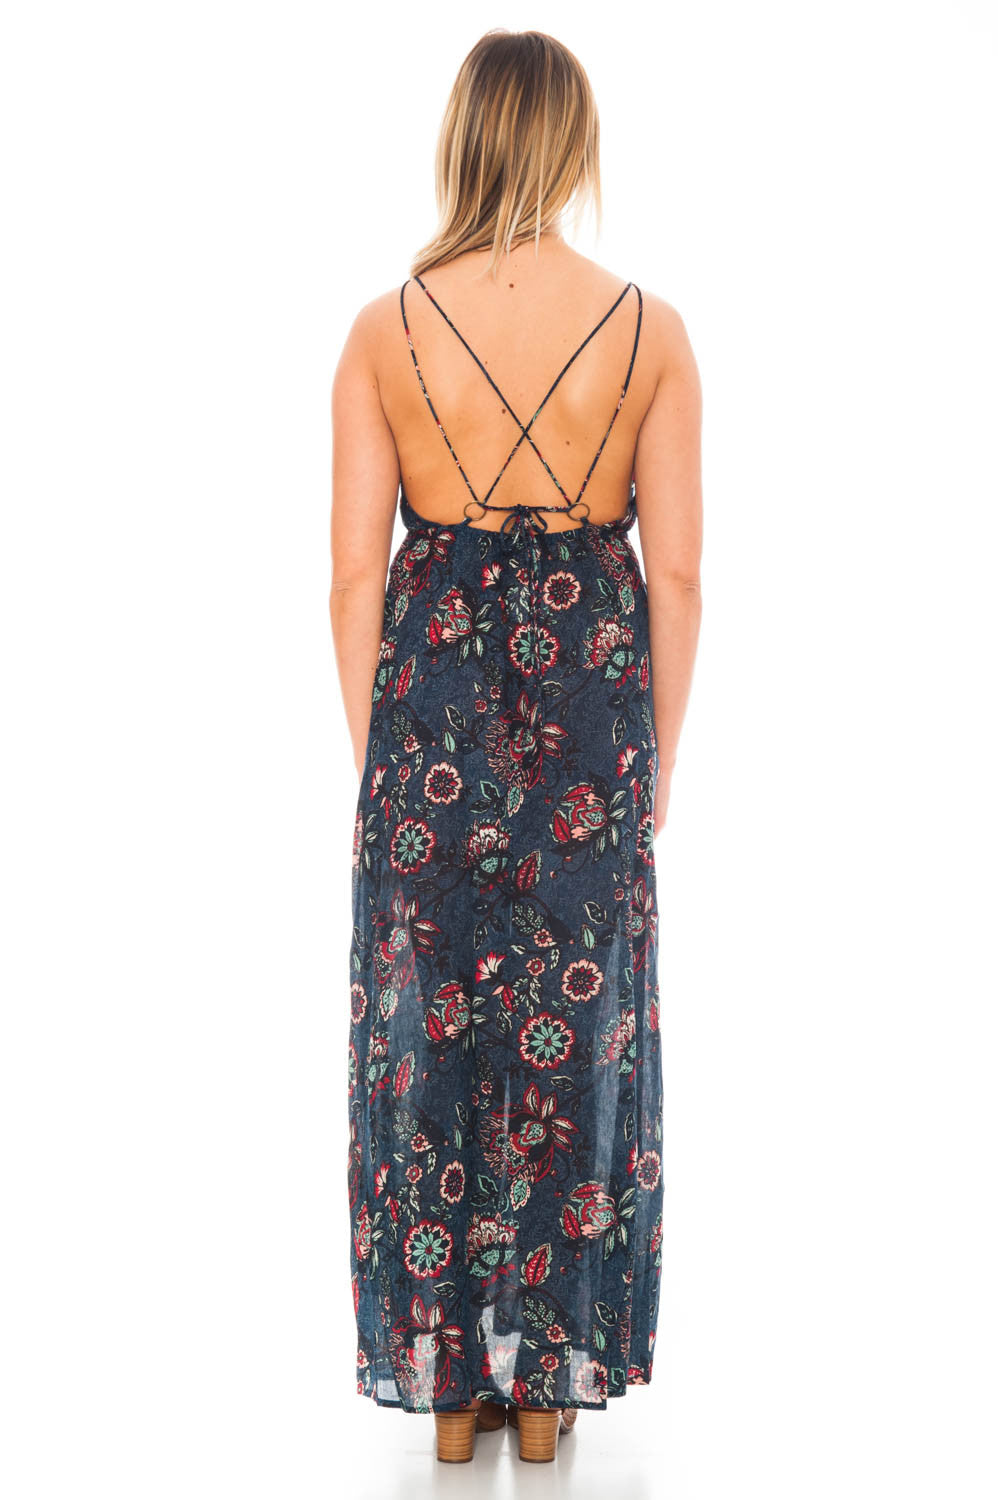 Dress - Patterned Maxi with Criss Cross Back